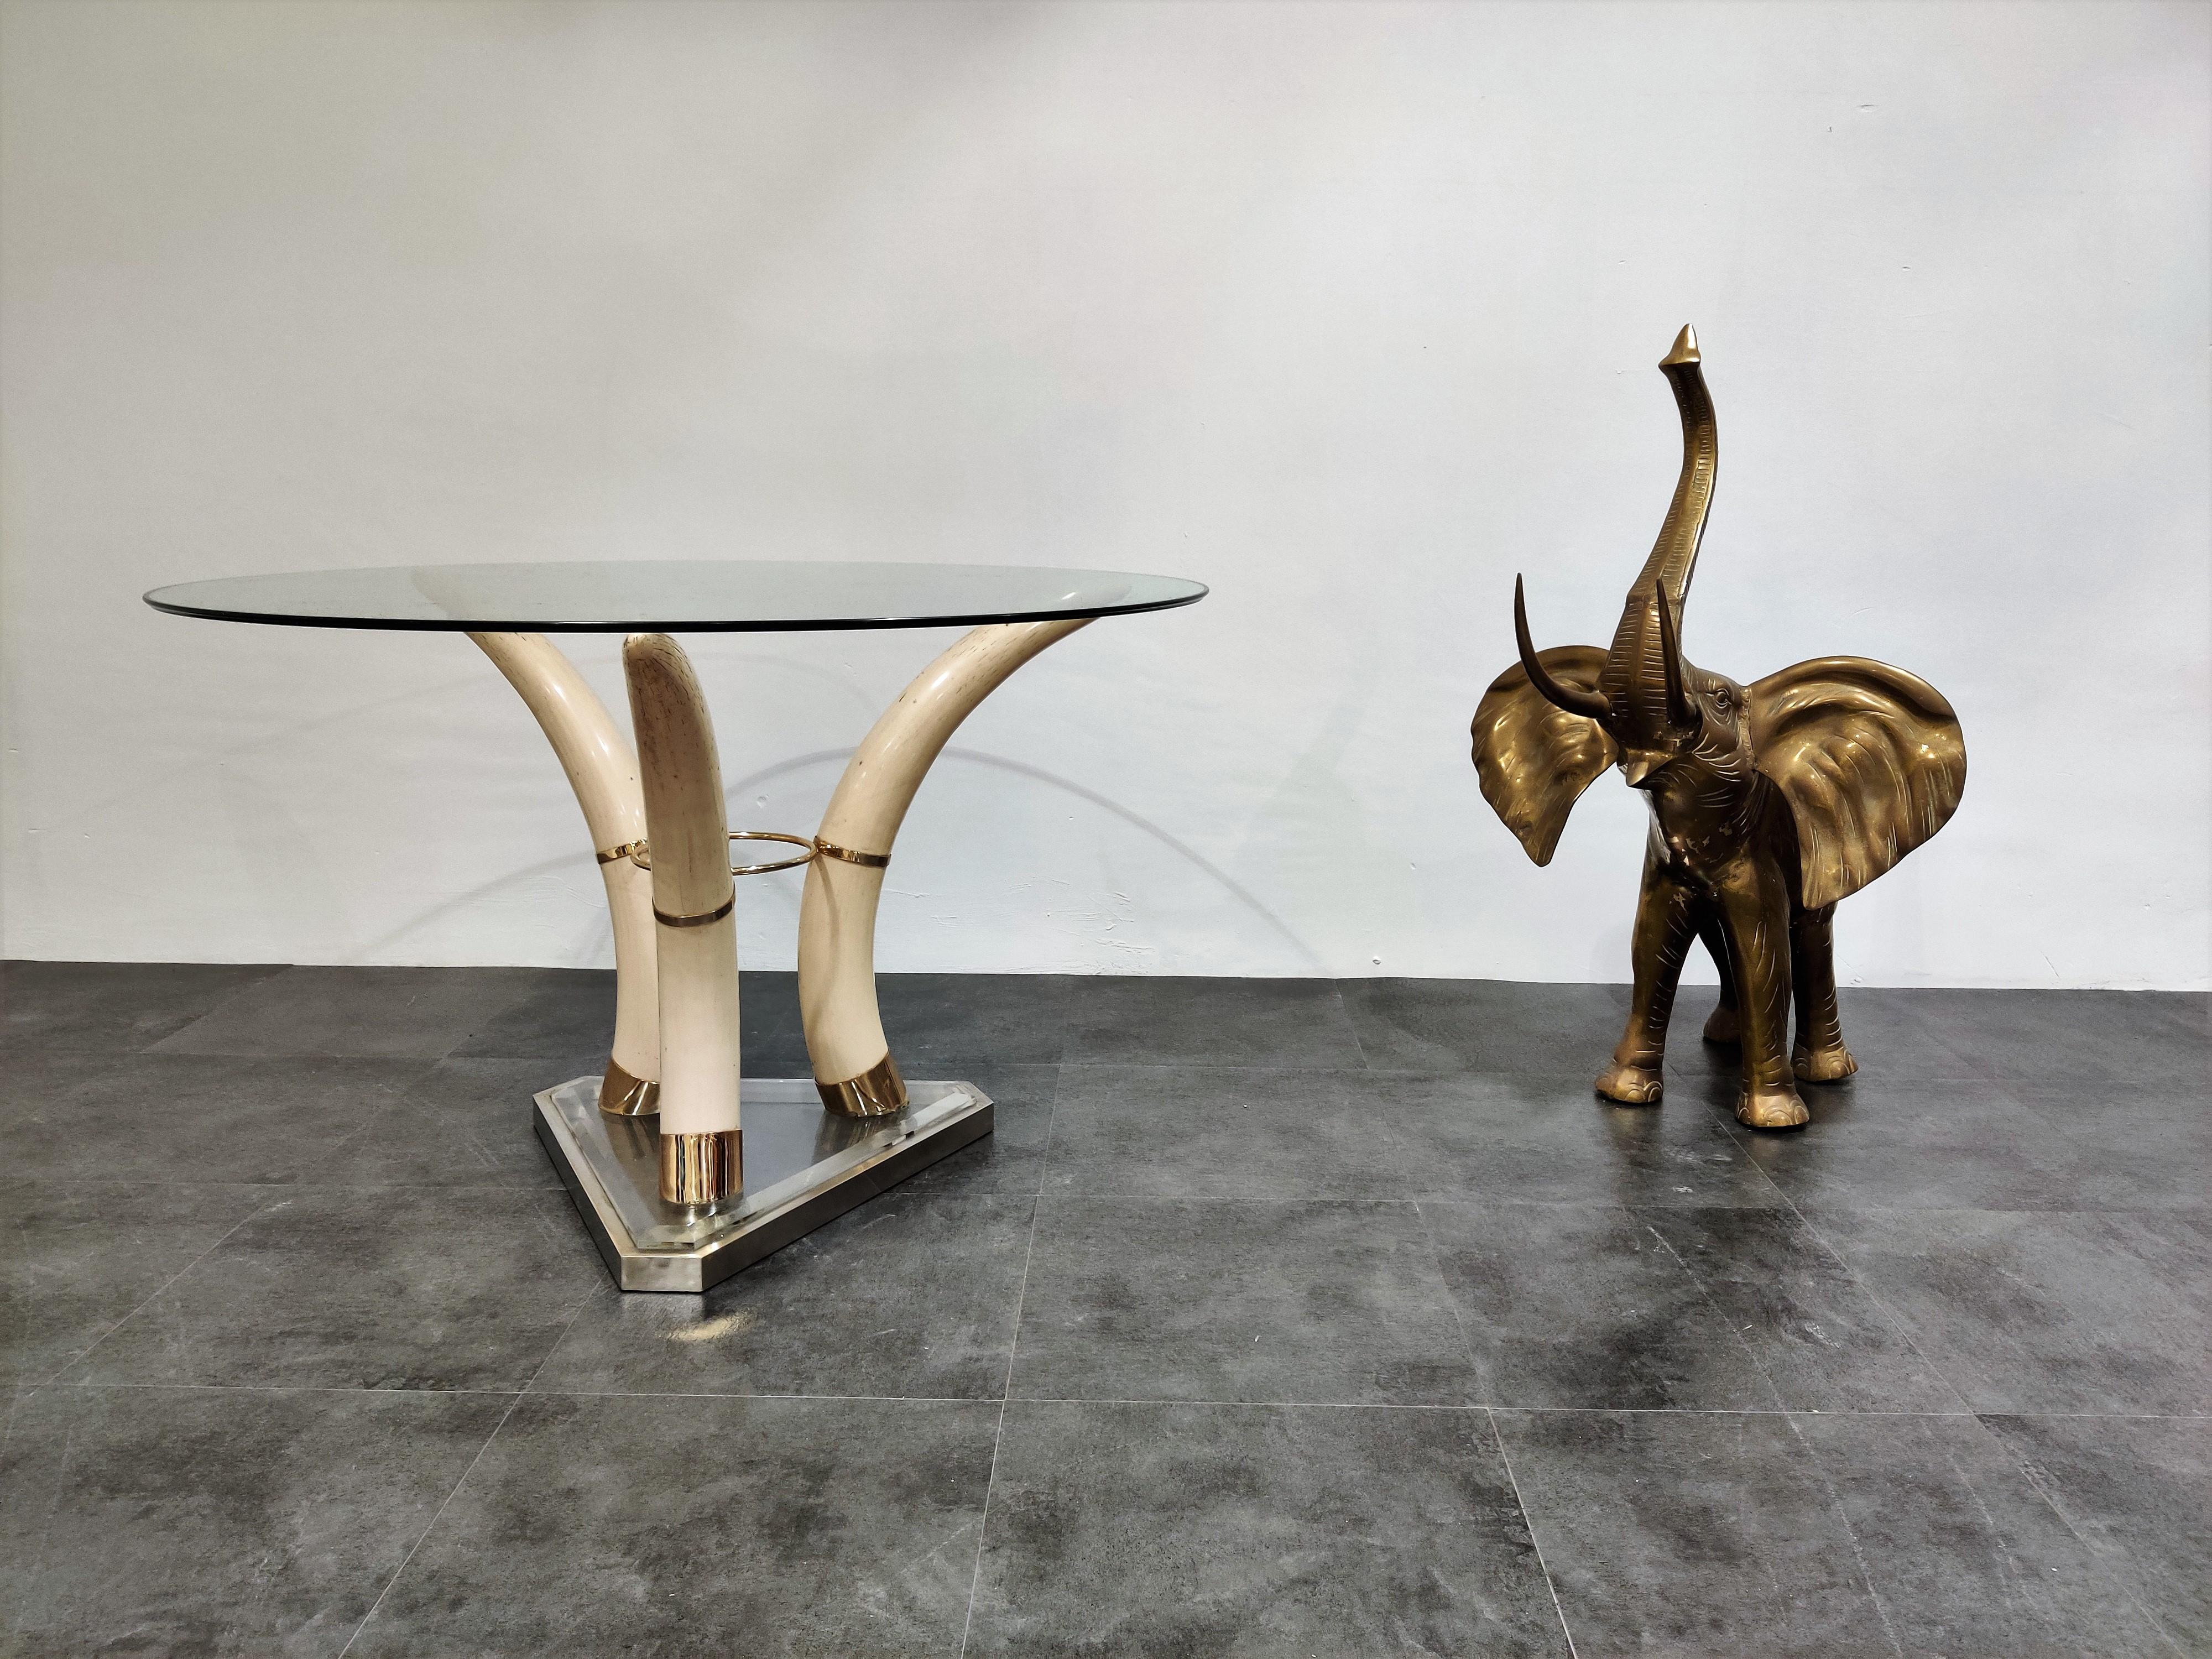 Elegant center table featuring faux elephant tusks made from resin mounted on a metal and lucite base with a round beveled glass top.

The tusks are held upright by brass cups and fastened with a brass center ring. 

Real eye catching occasional